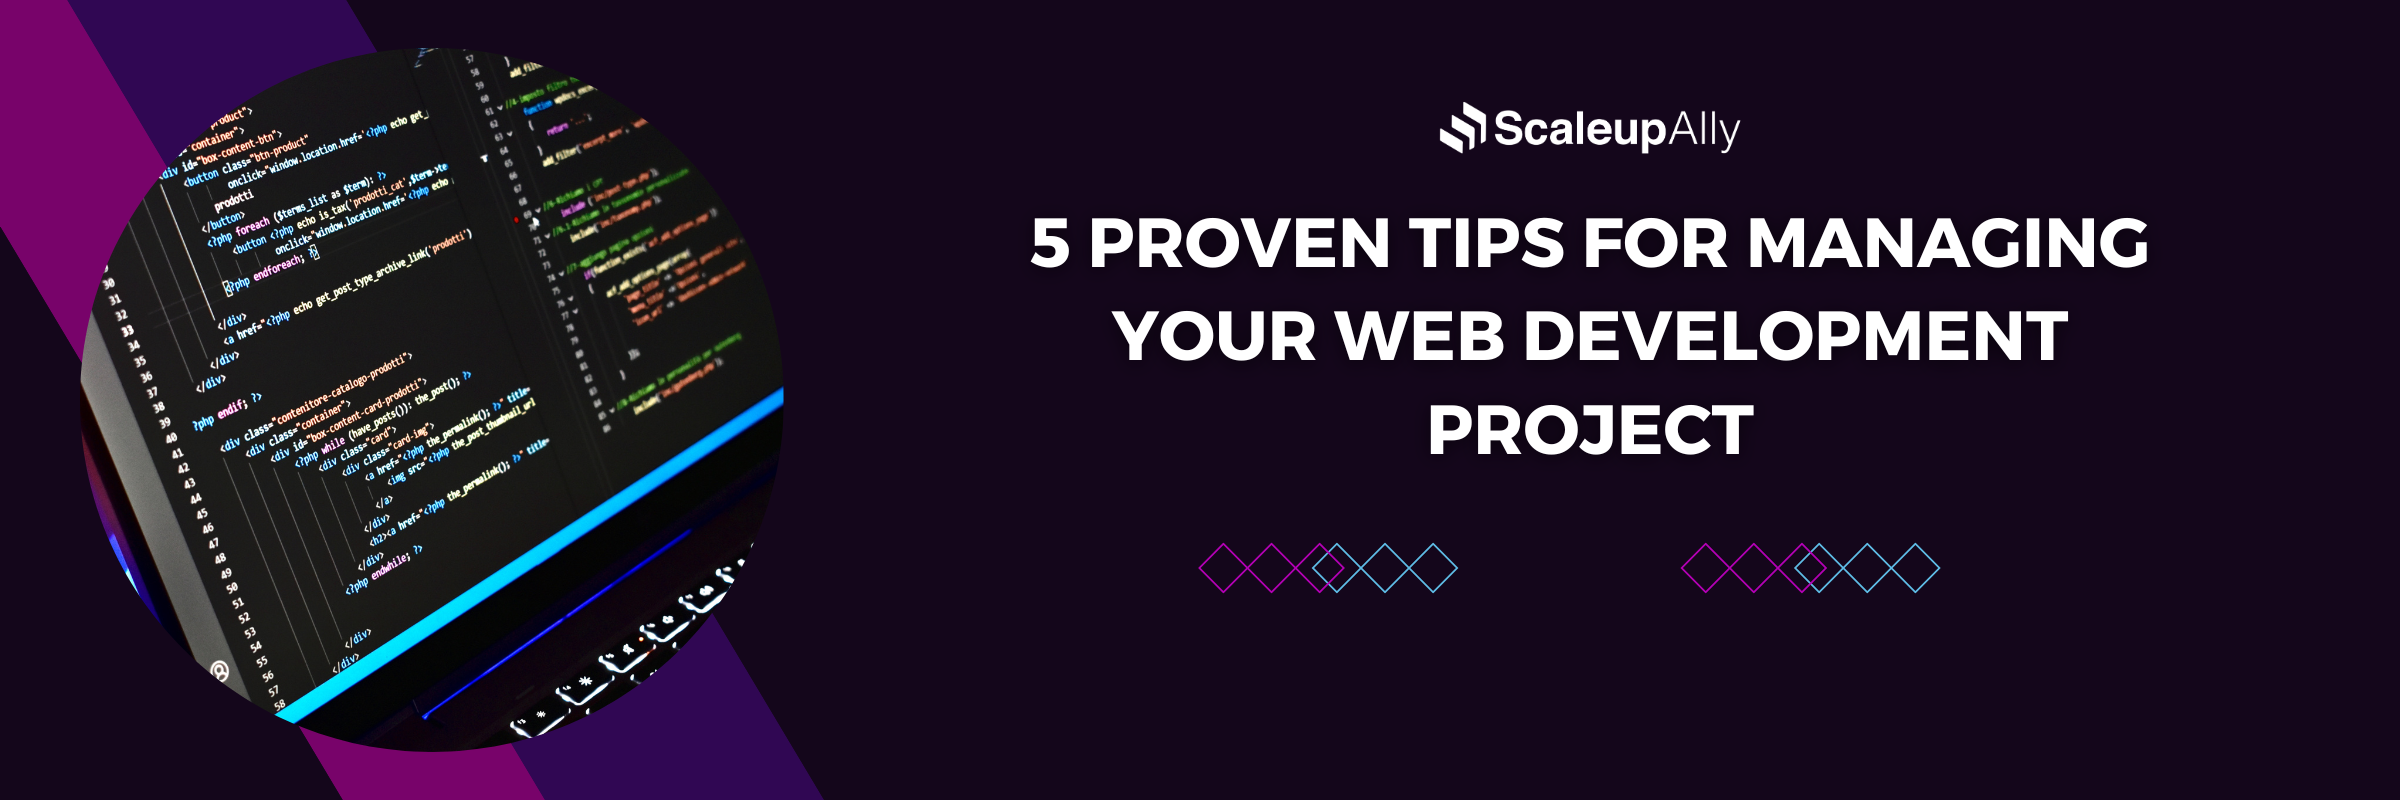 5 Proven Tips for Managing Your Web Development Project